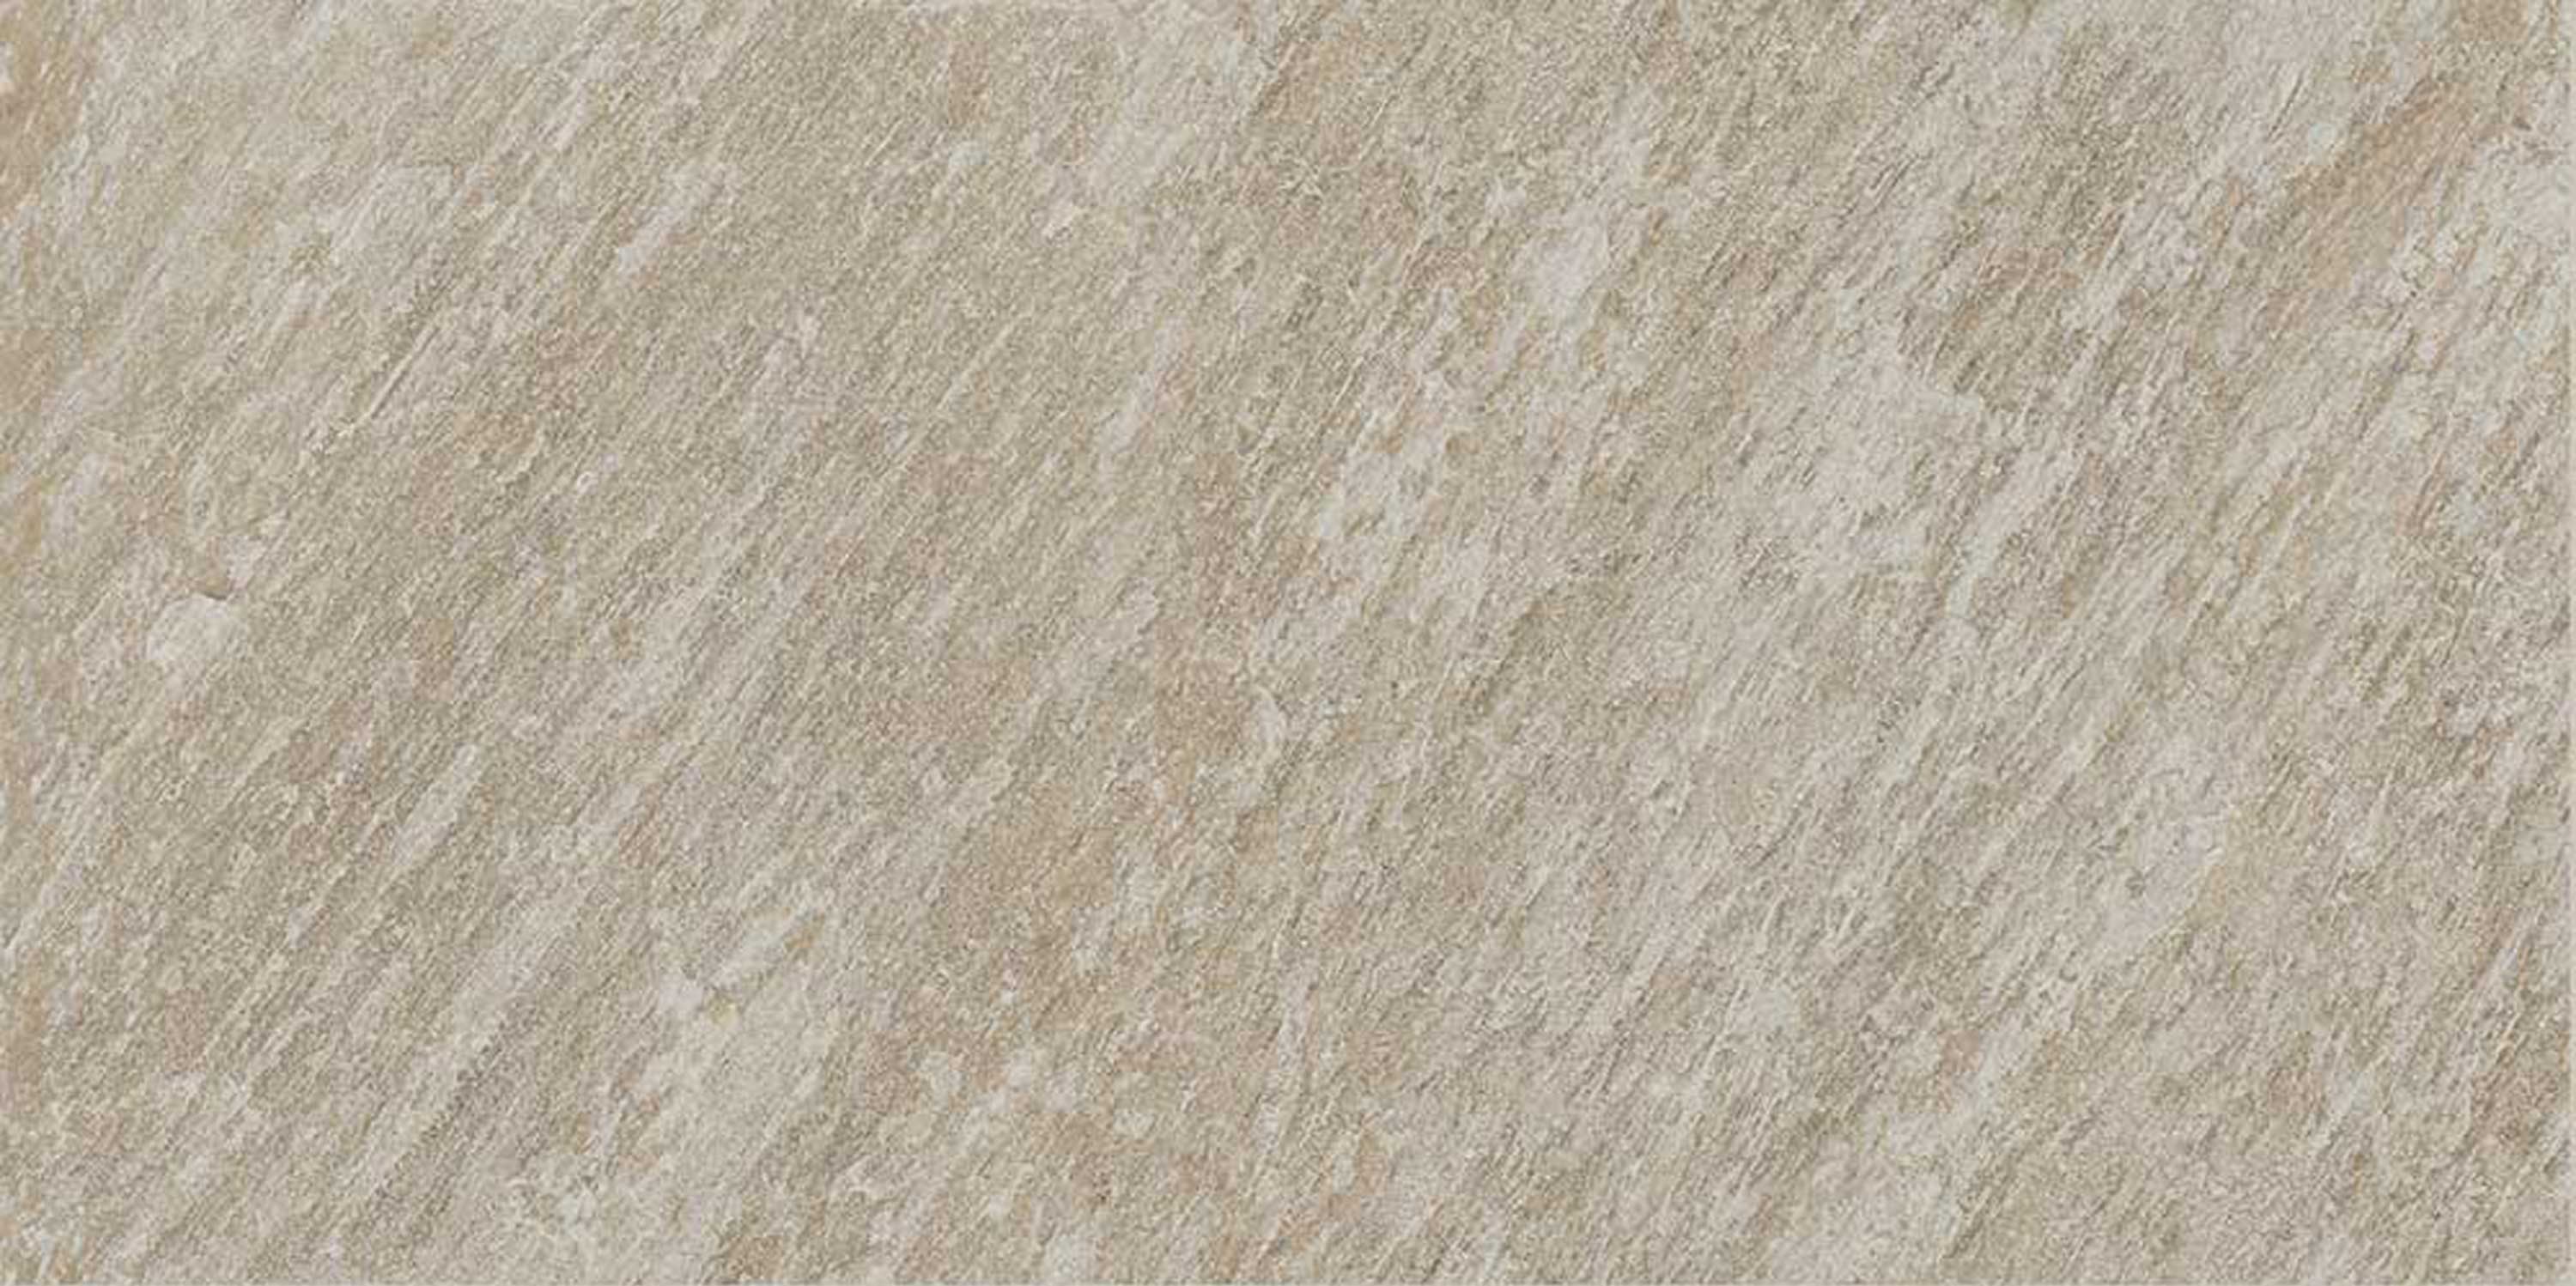 landmark 9mm globe barge gold field tile 12x24x9mm matte rectified porcelain tile distributed by surface group international